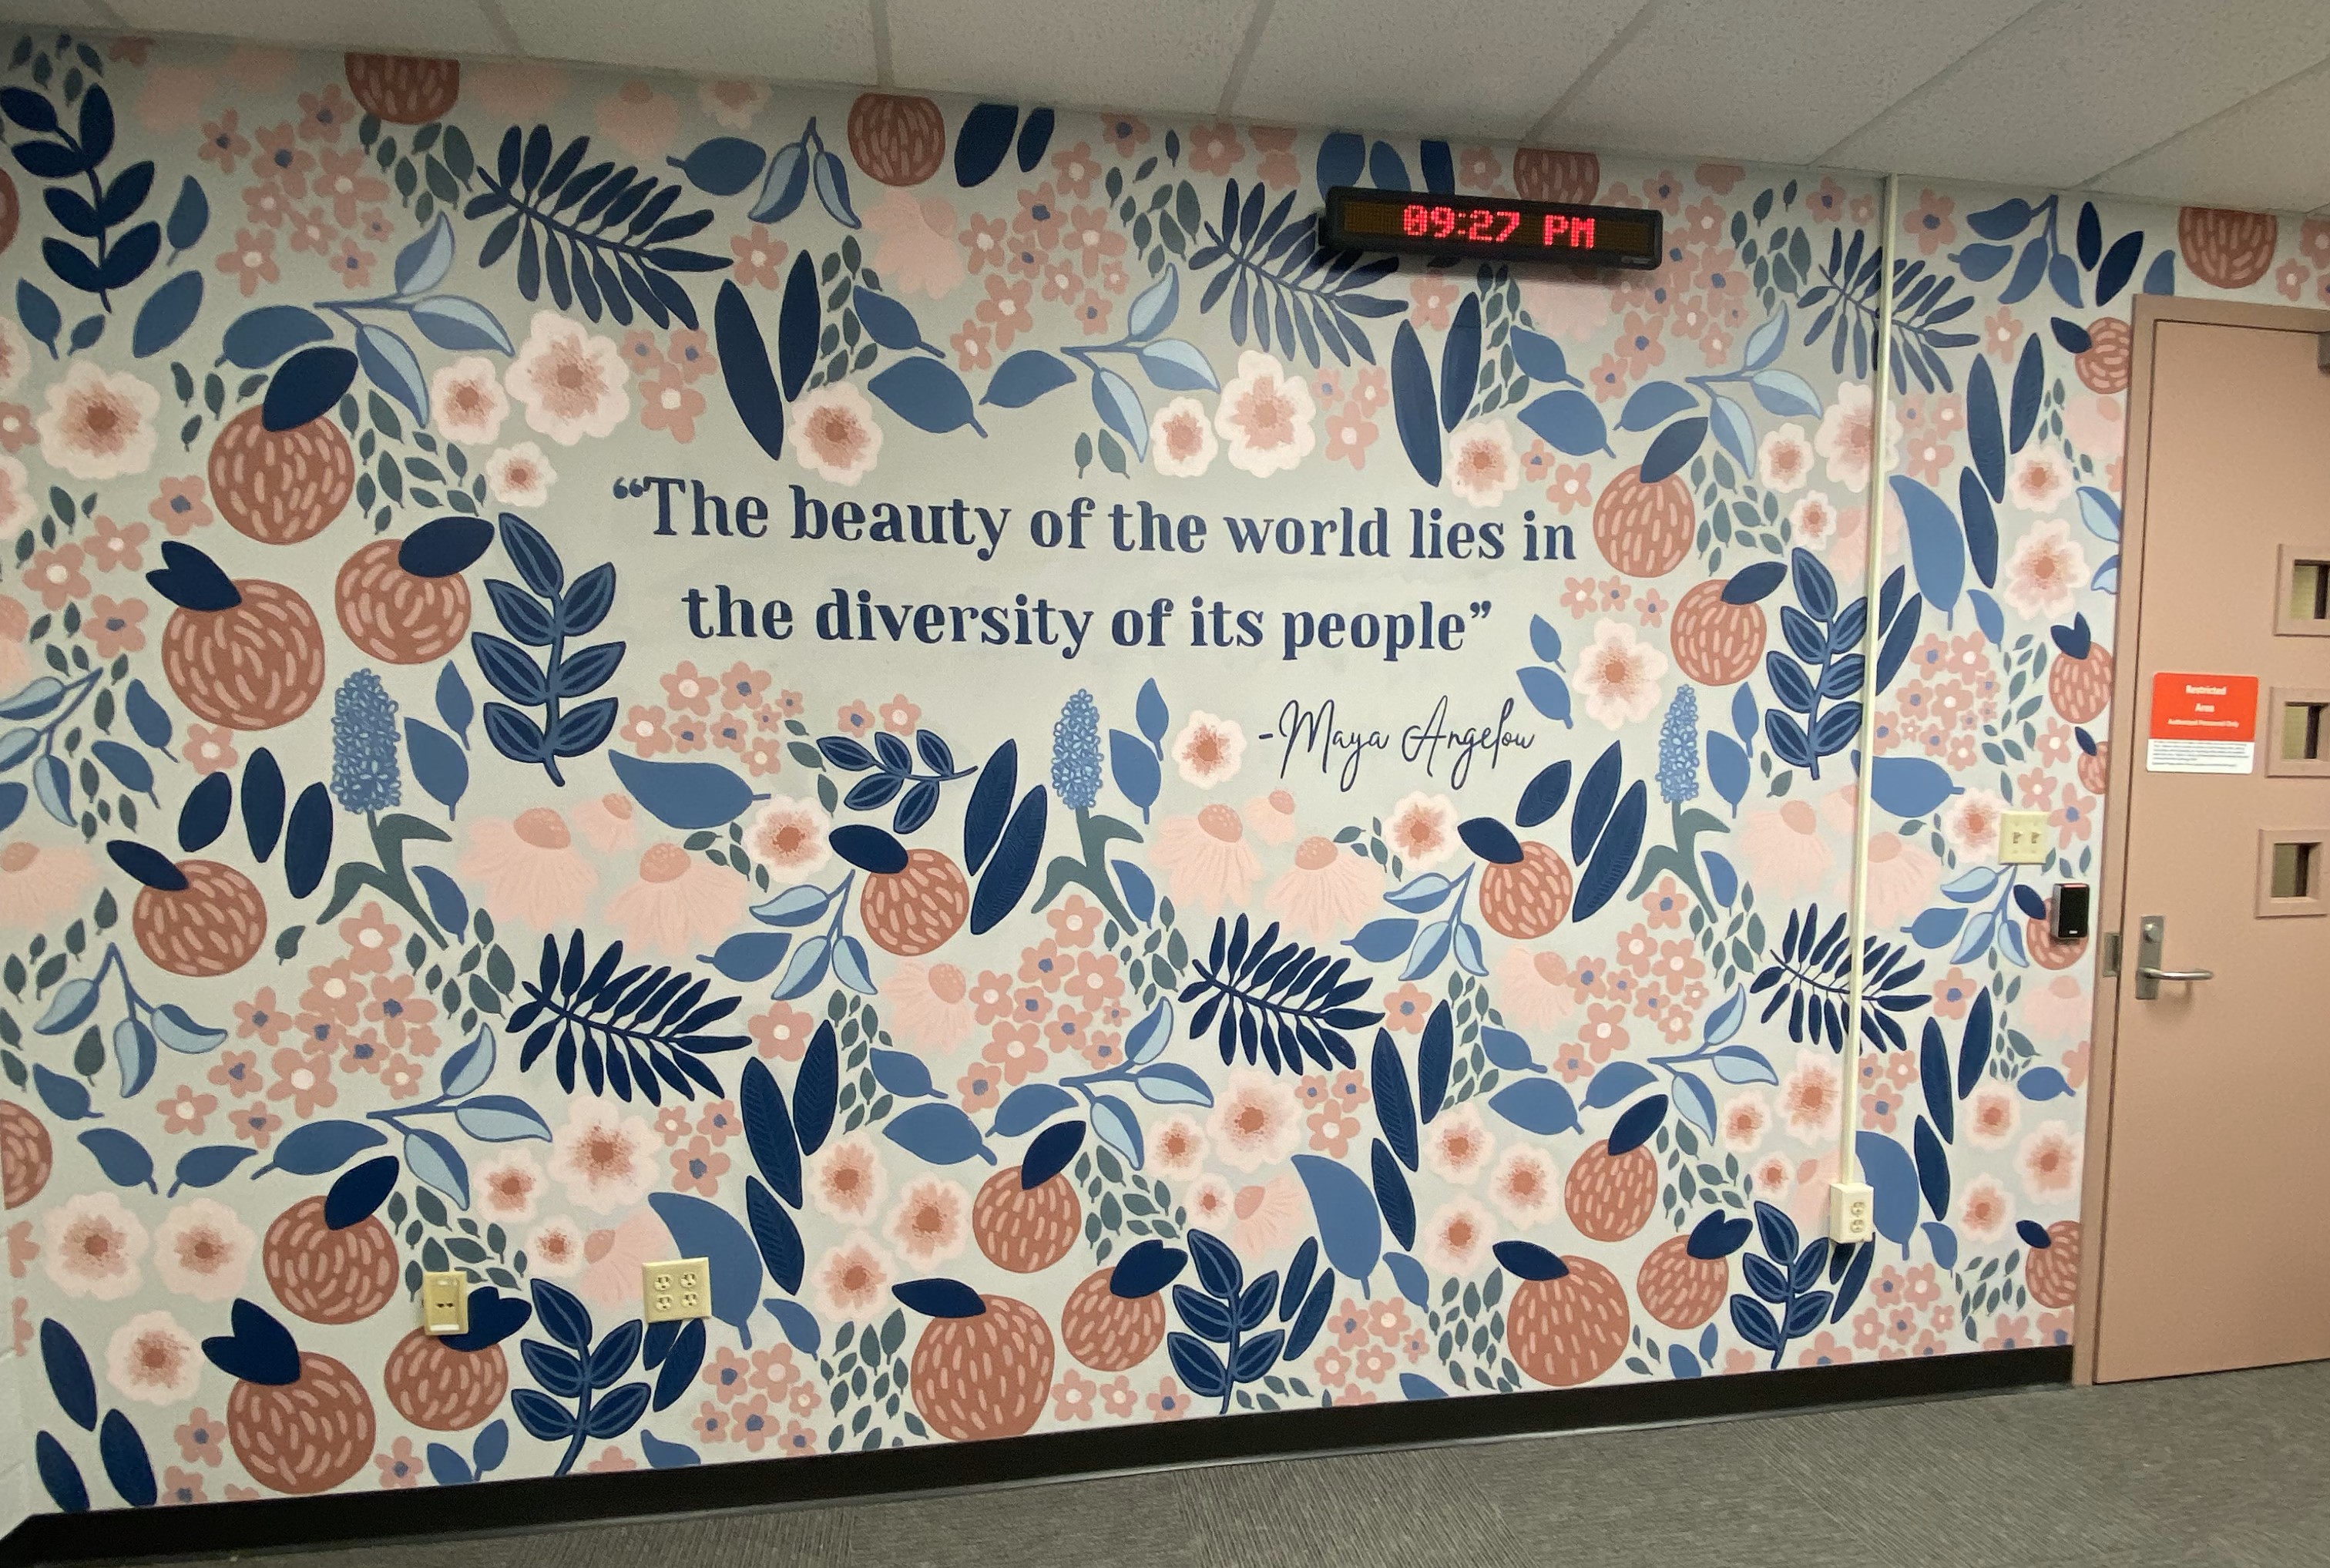 A mural stating "the beauty of the world lies in the diversity of its people" a quote from Maya Angelou